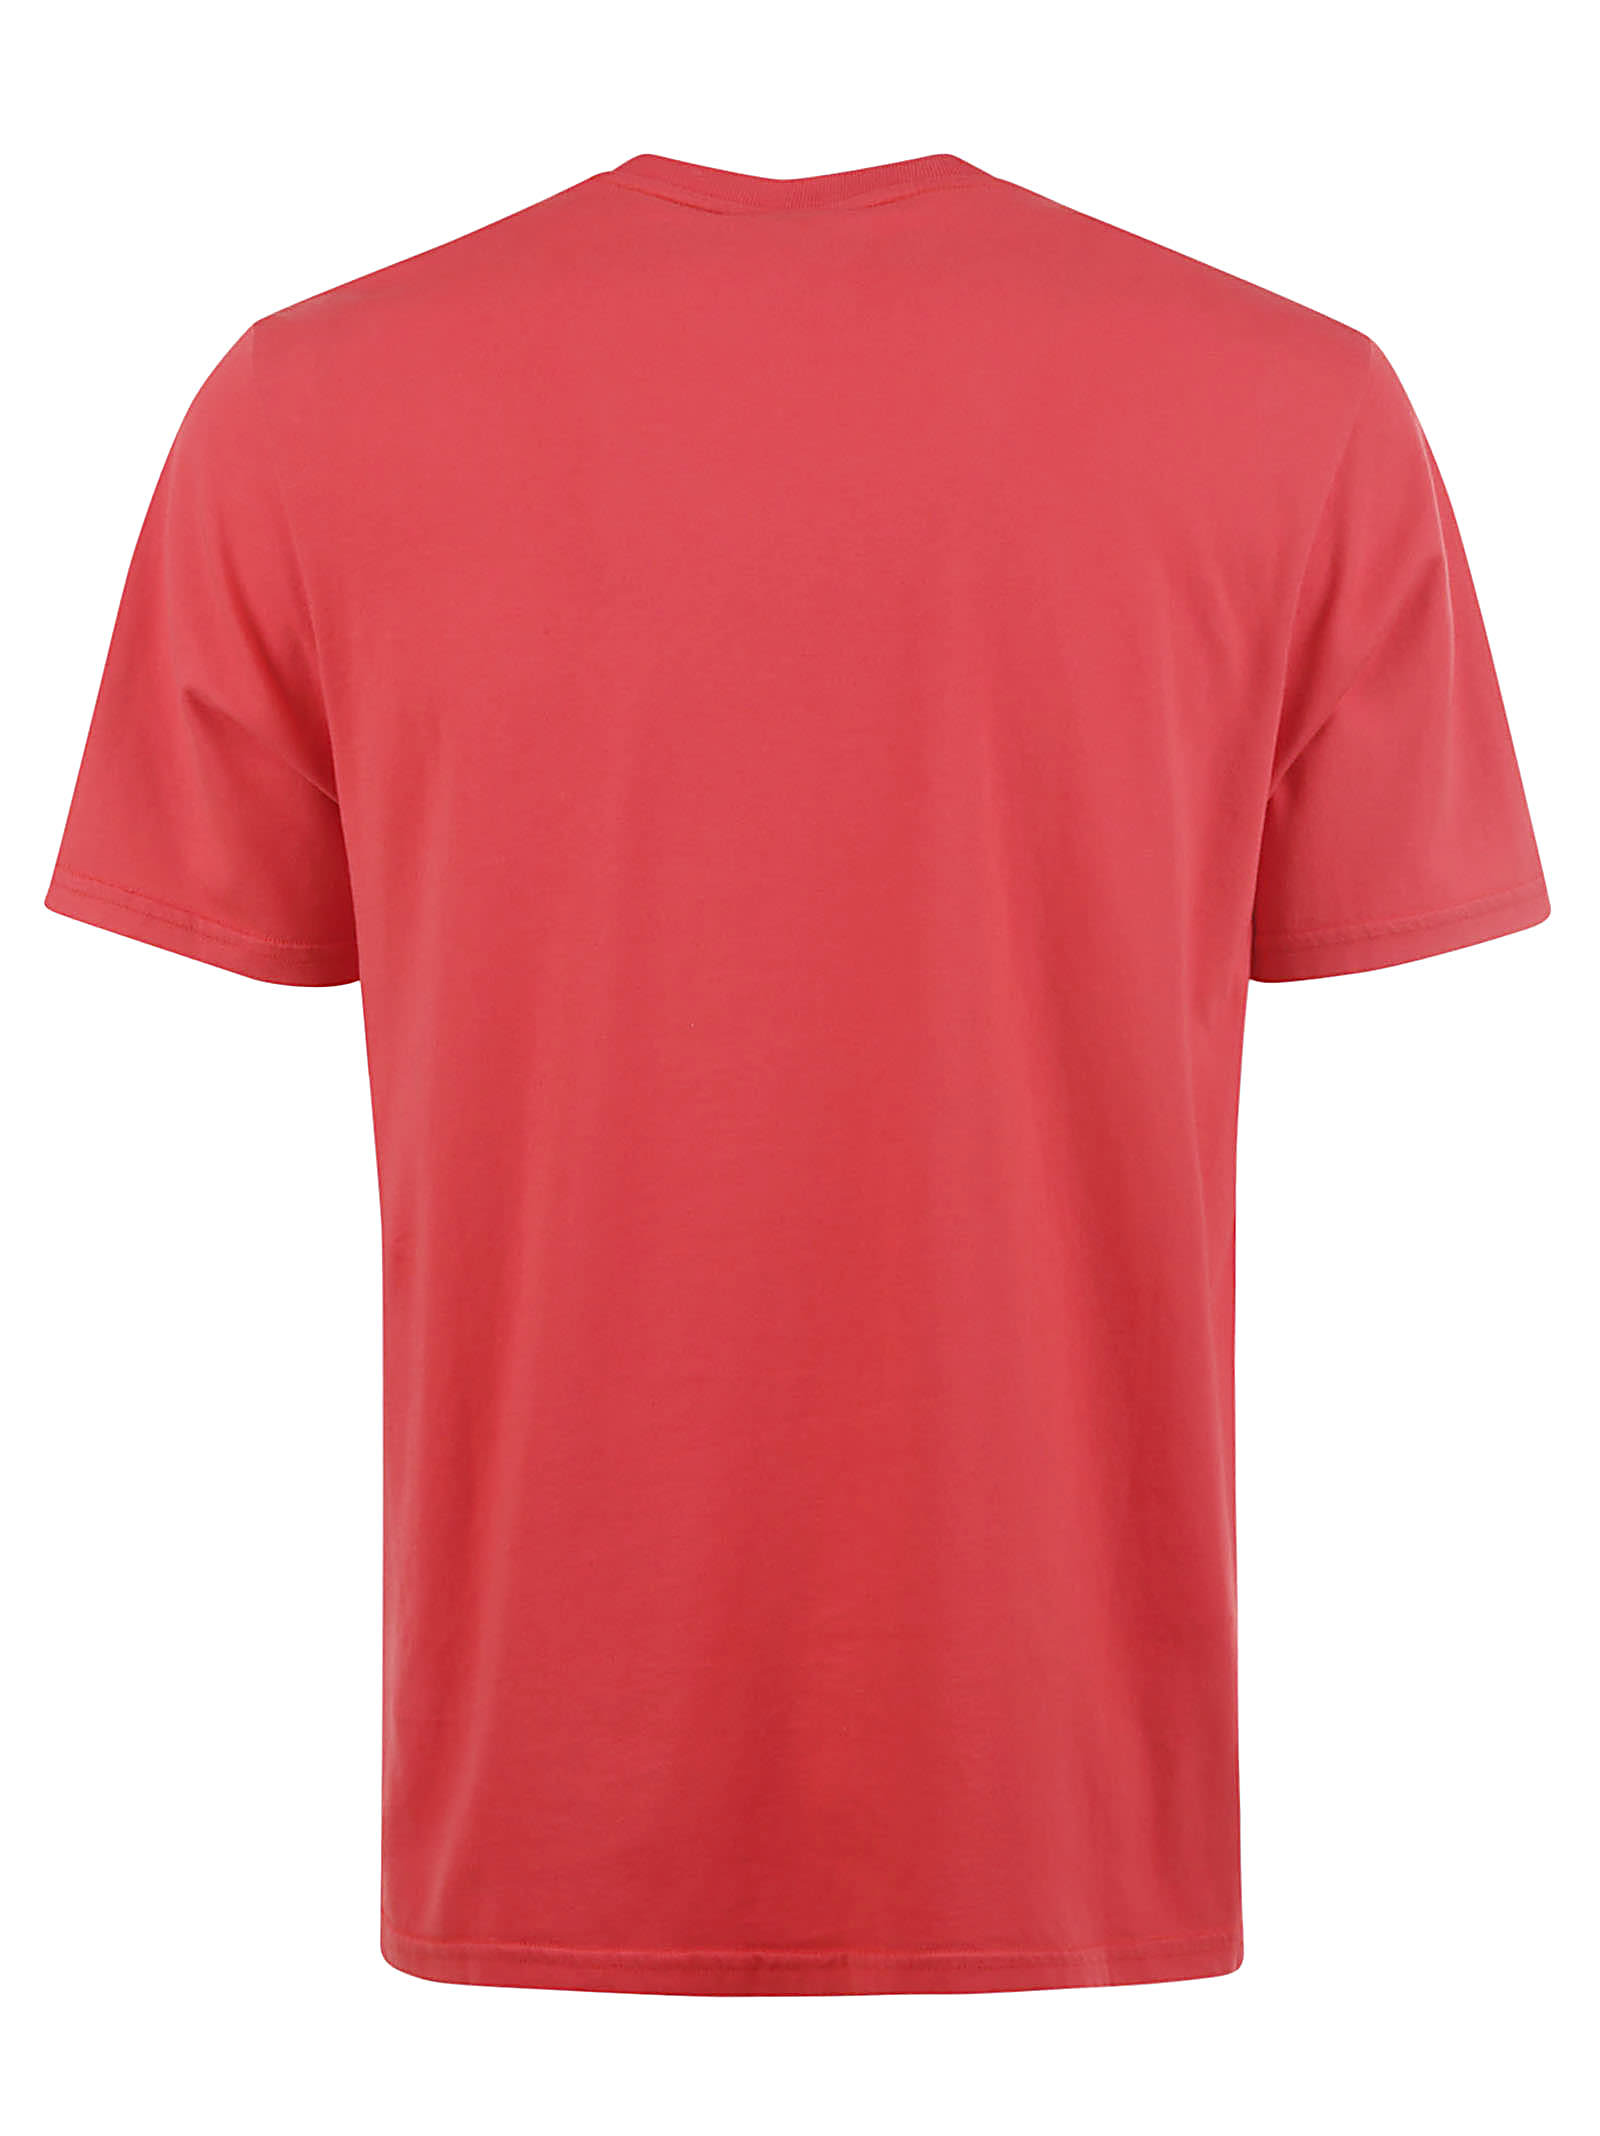 Shop Autry T-shirt Iconapparel In Red